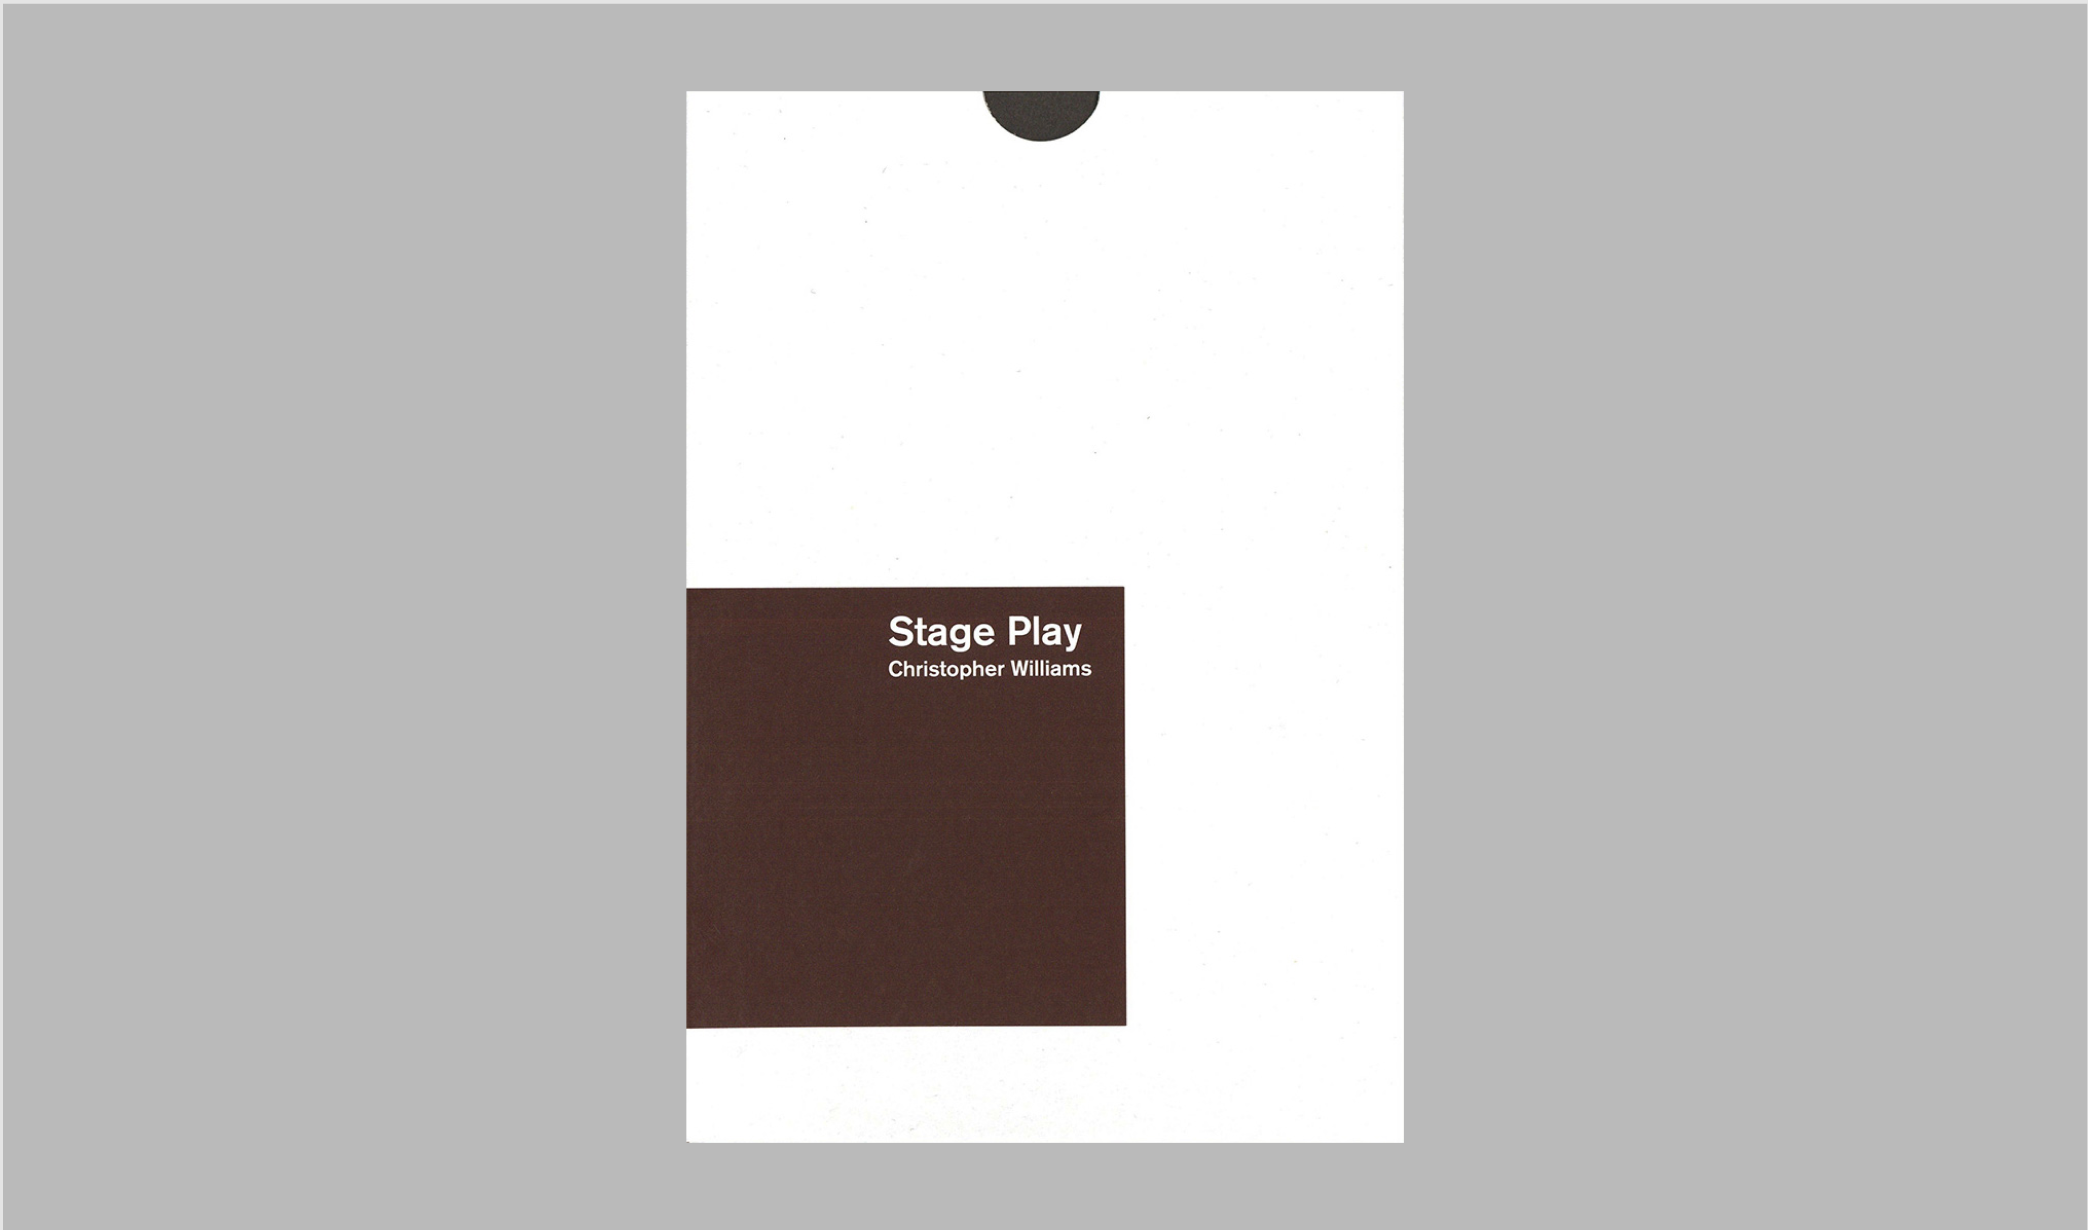 A book by Christopher Williams called Stage Play, dated 2021.